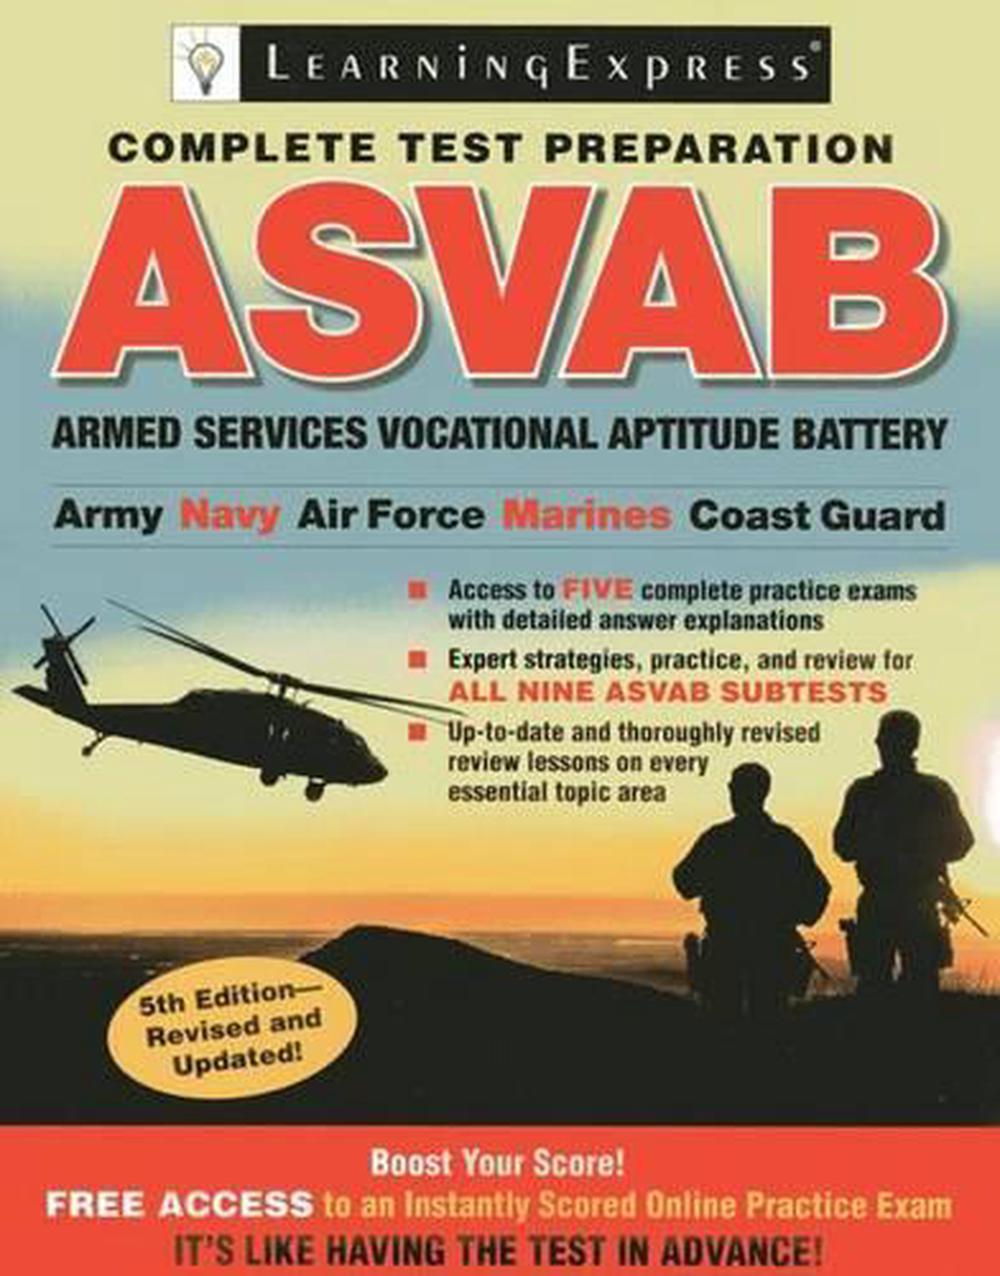 asvab-armed-services-vocational-aptitude-battery-by-learningexpress-llc-englis-9781576859292